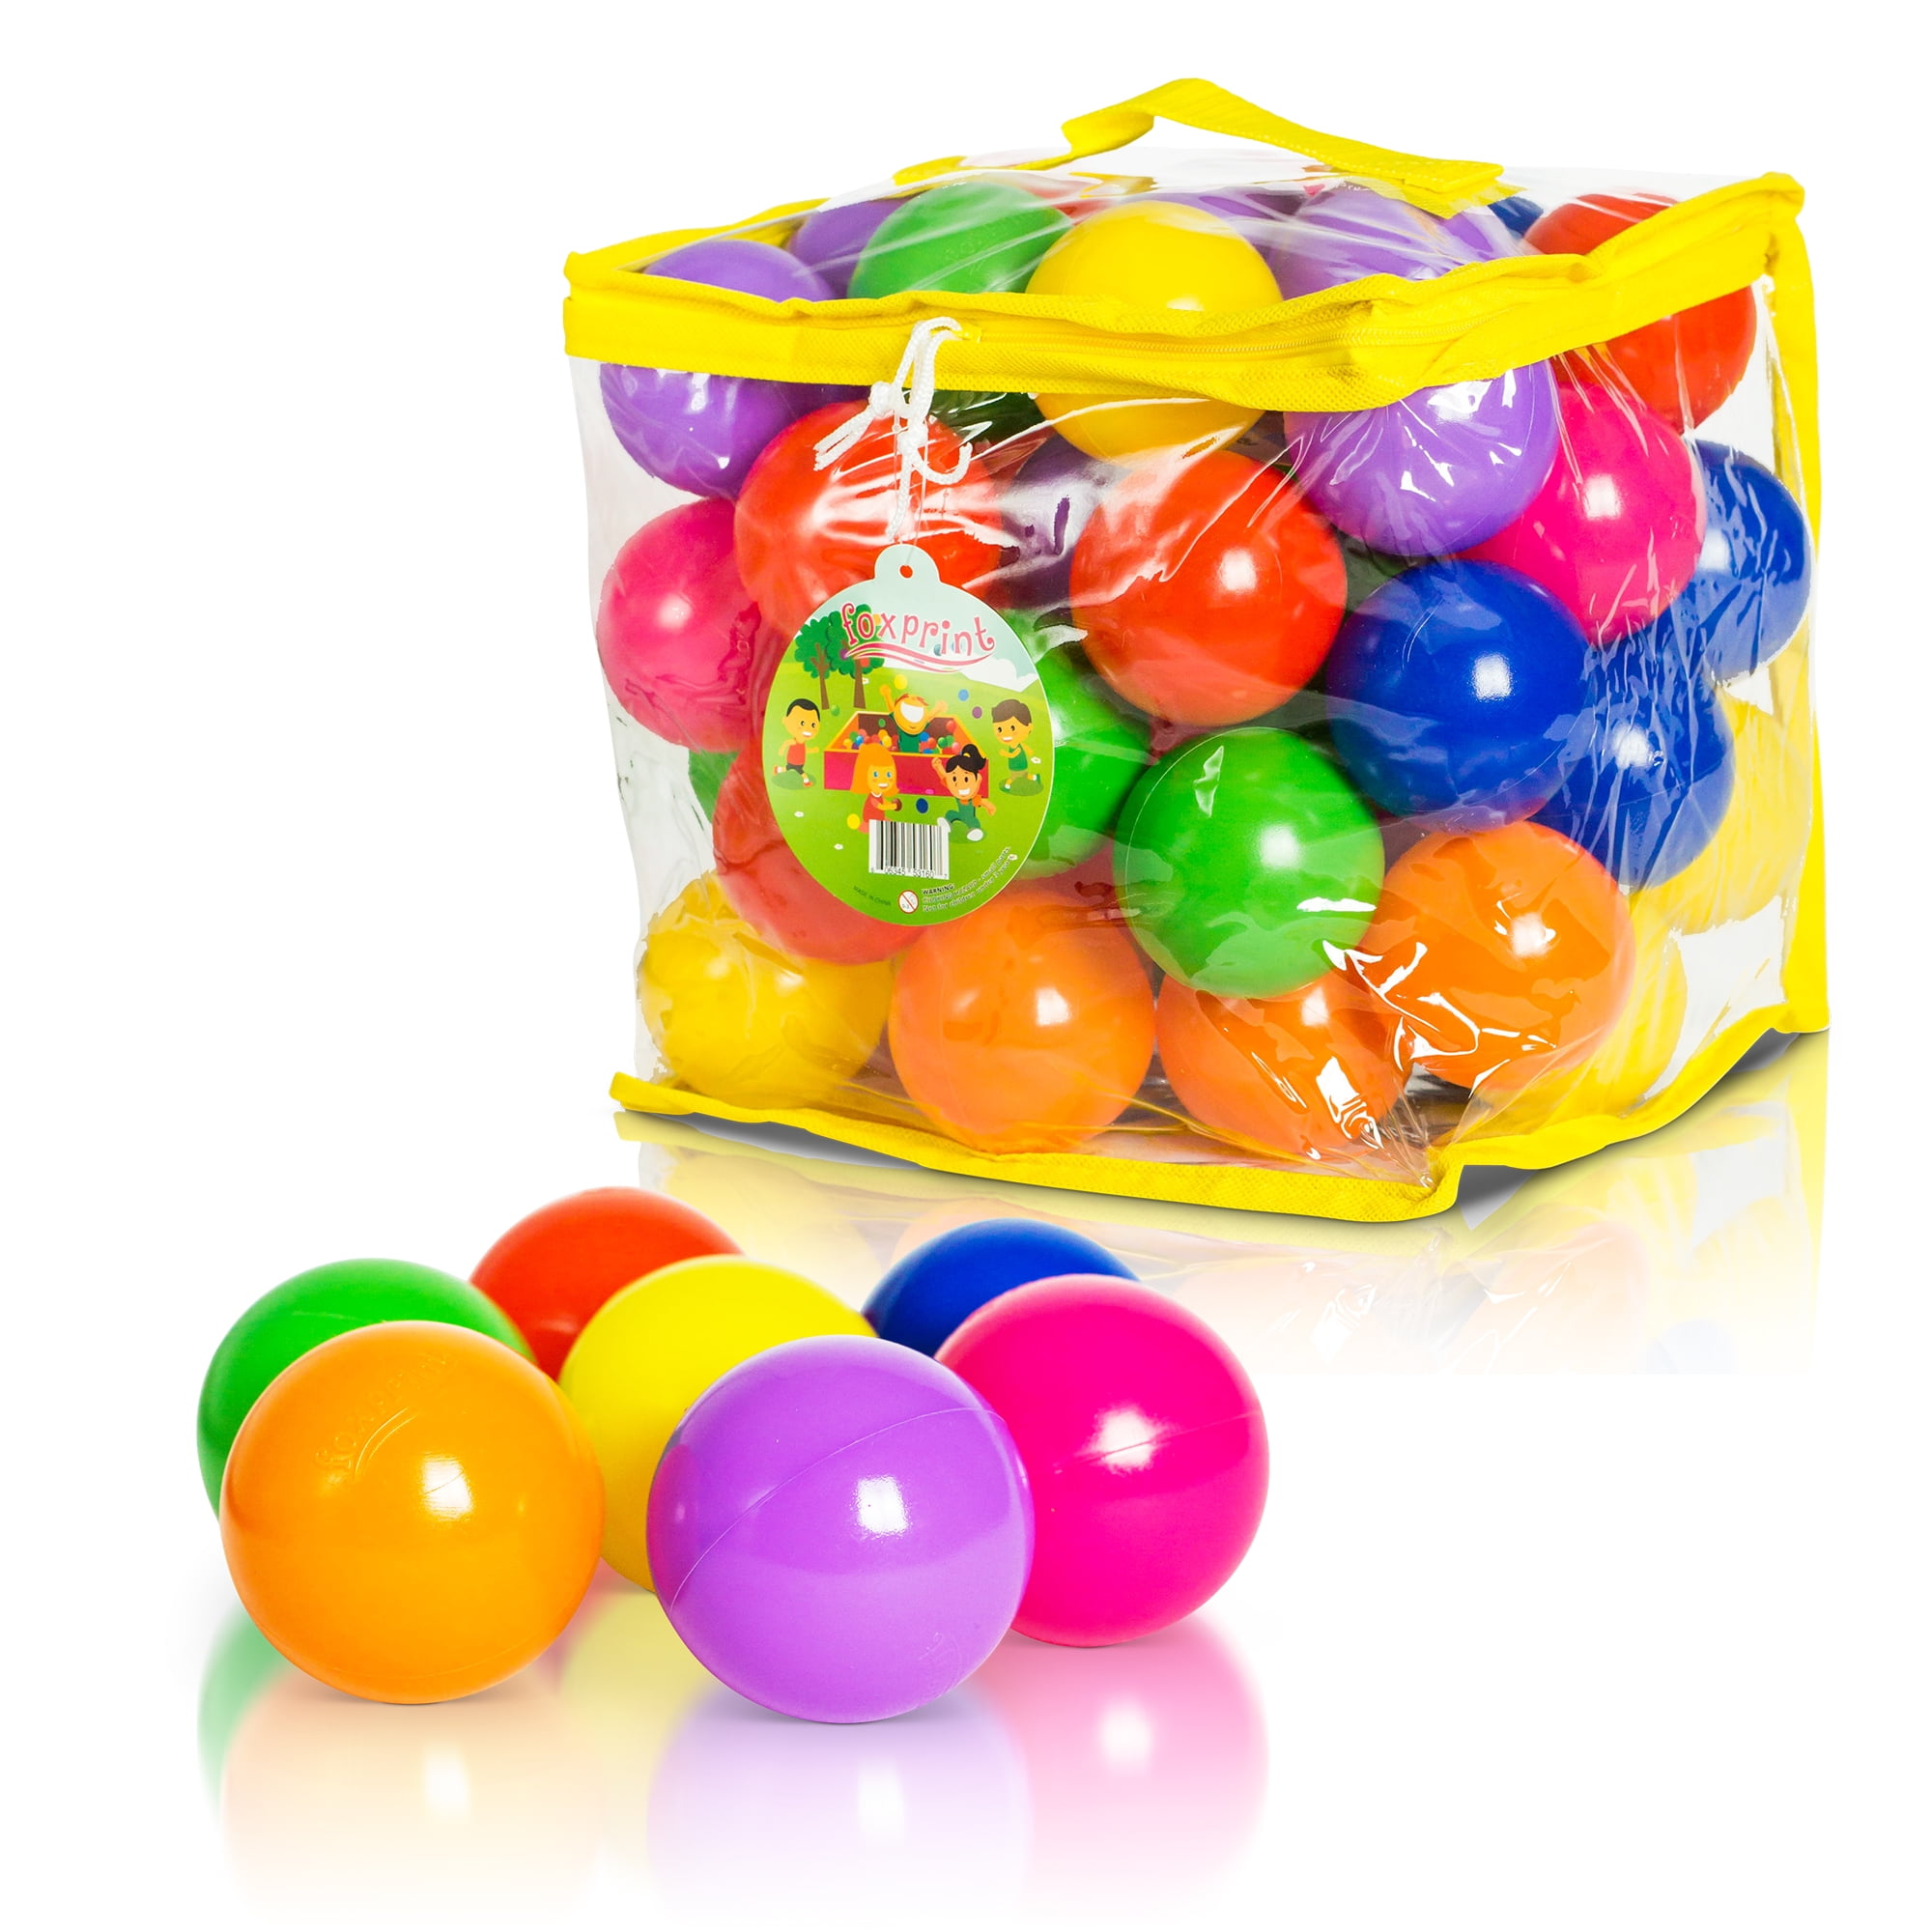 200x Ball Pit Balls Play Kid Baby Plastic Ocean Soft Toy for Playpen 4 Colors 